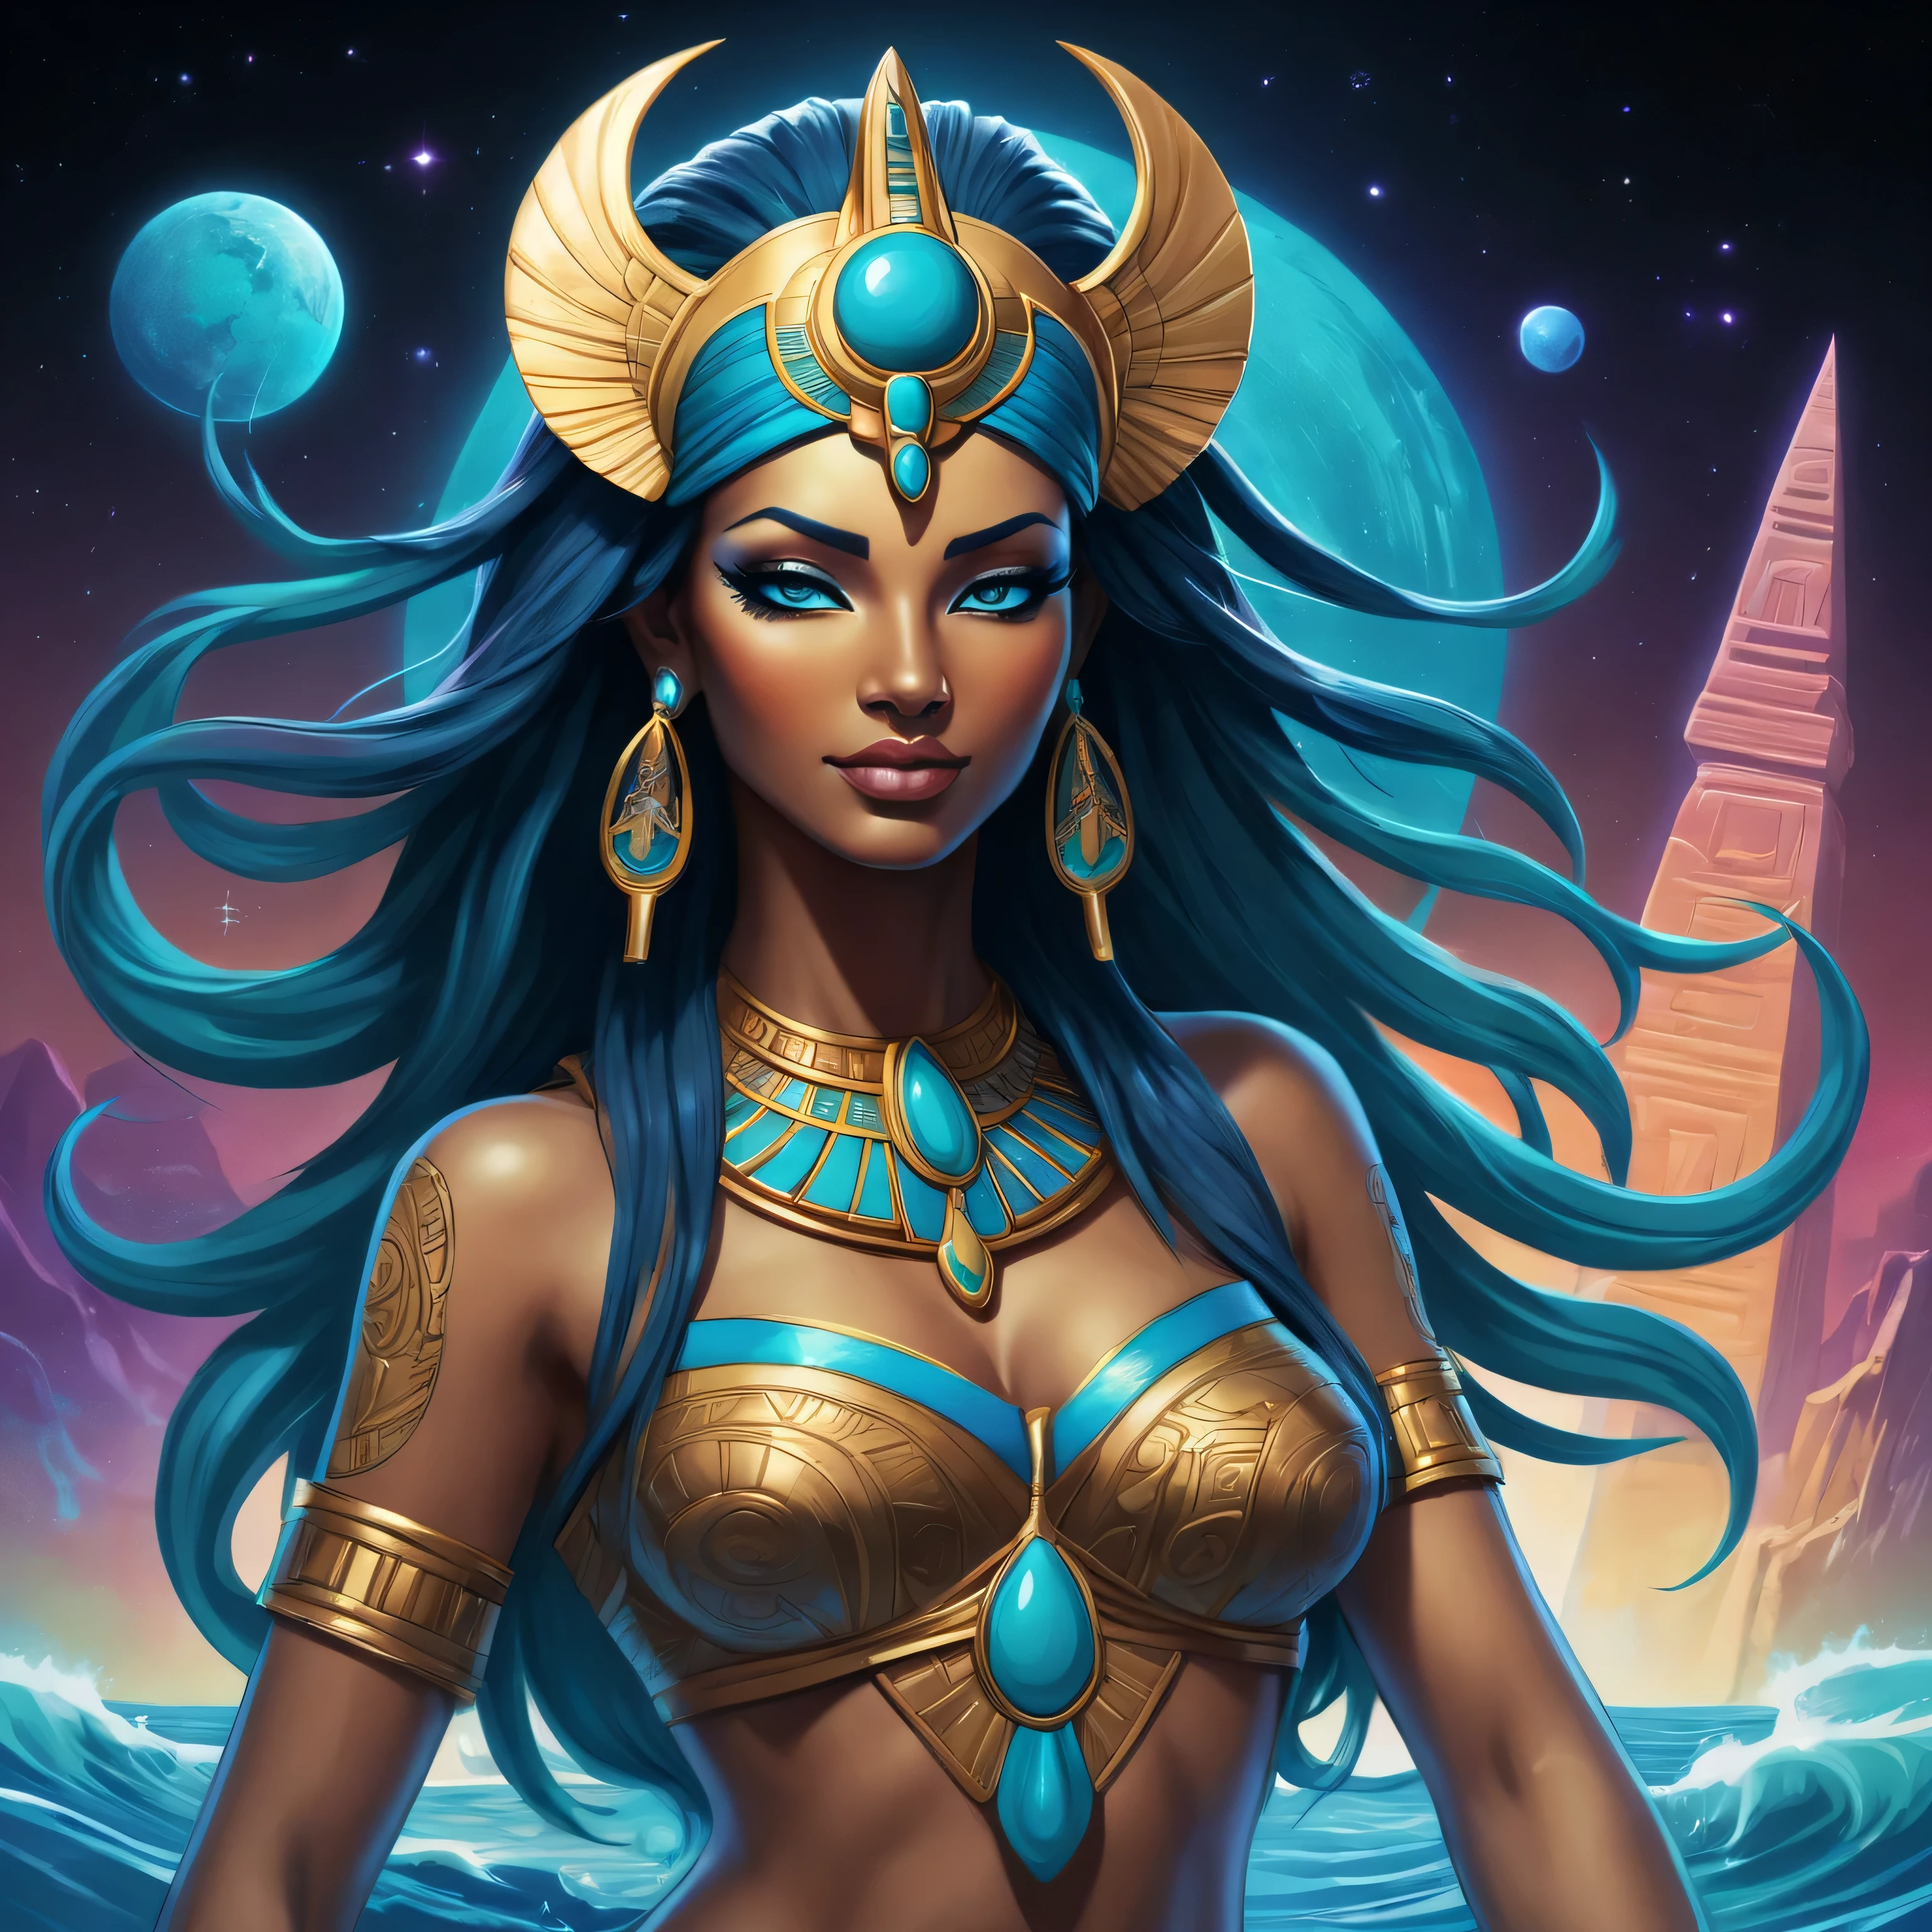 In digital pop art style, create an anime-infused design of the Egyptian goddess Tefnut employing an exquisitely detailed, luminous and bioluminescent rendering.

Print the name of the goddess in flowing hieroglyphics, glowing with neon light, at the bottom left corner of the image. Depict Tefnut as a graceful and powerful figure, with long waves of flowing, vibrant blue and turquoise water cascading from the heavens and flowing around her, creating a dynamic and aquatic scene. Her divine form should be adorned with intricate, glowing tattoos inspired by lotus flowers, cobras, and other ancient Egyptian symbols. Incorporate elements of comic book storytelling, such as bold, contrasting lines and exaggerated features to emphasize her regality and ethereal nature. Bring this divine being to life with a background that features a cosmic landscape, complete with twinkling stars and galaxies, adding a celestial touch to the overall design.